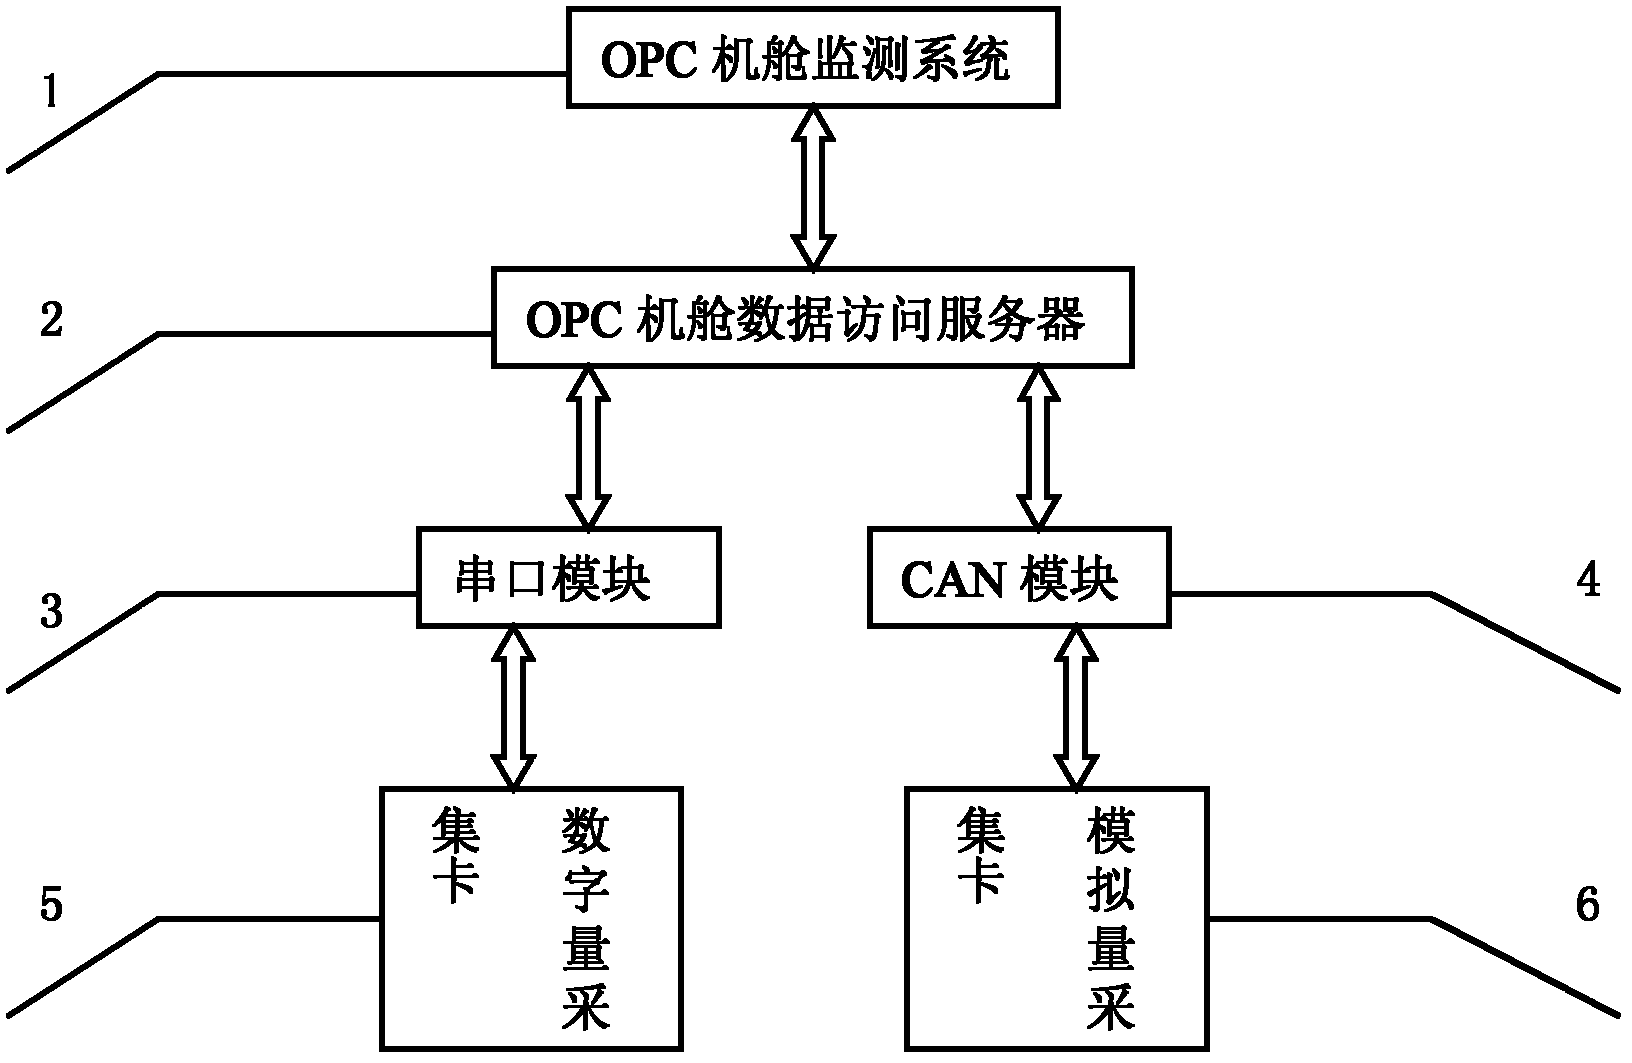 Marine engine room data acquisition and monitoring system based on OLE for process control (OPC) technology